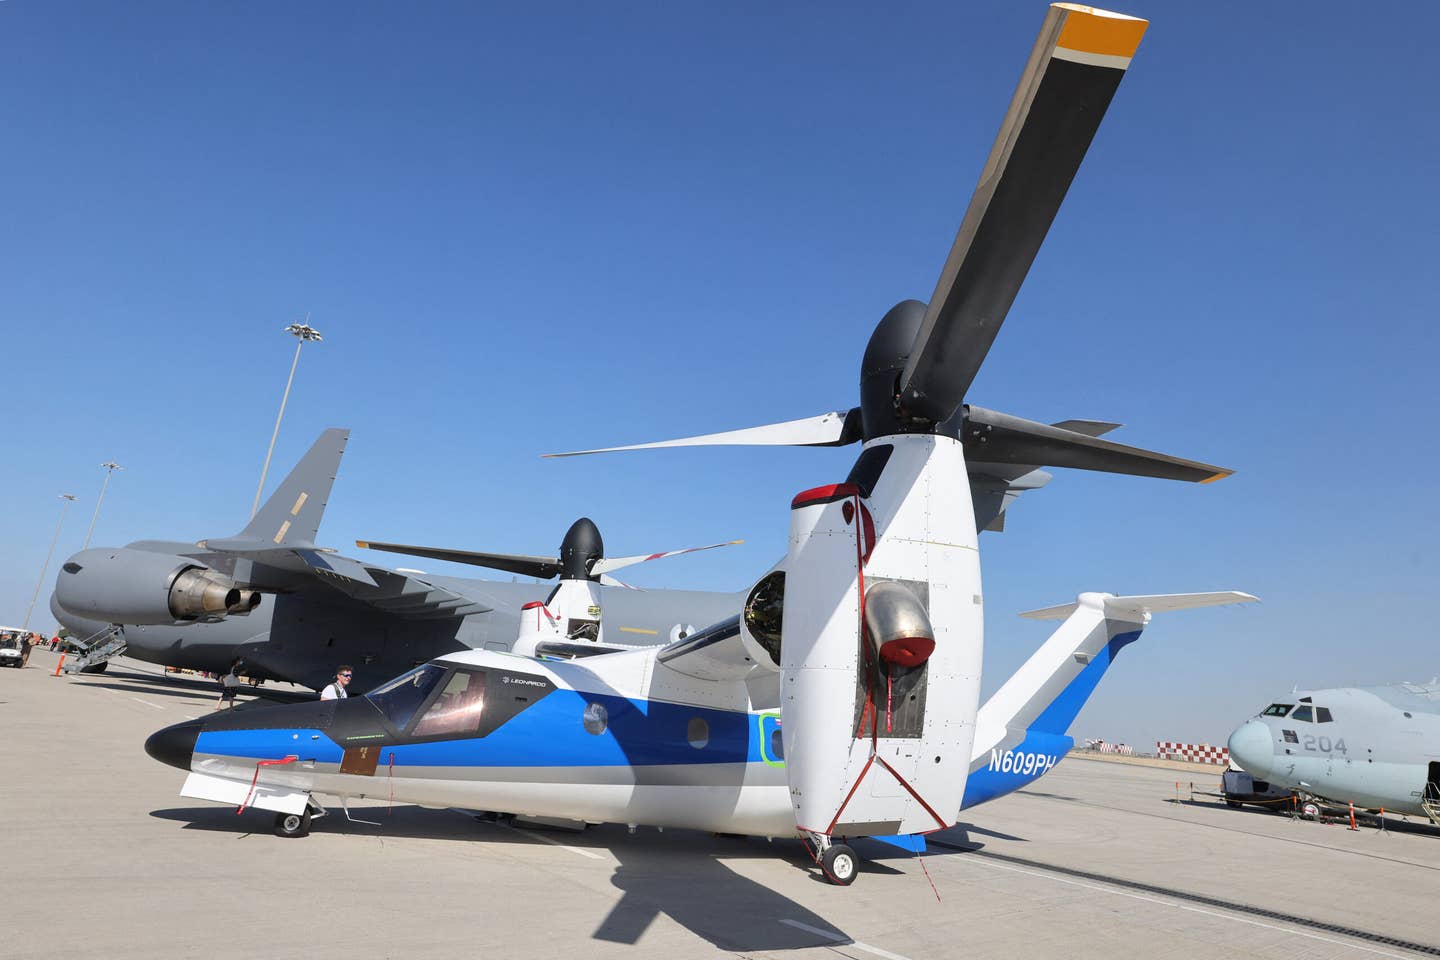 The AW609 makes its debut at the 2021 Dubai Airshow in November 2021. <em>Photo by GIUSEPPE CACACE/AFP via Getty Images</em>